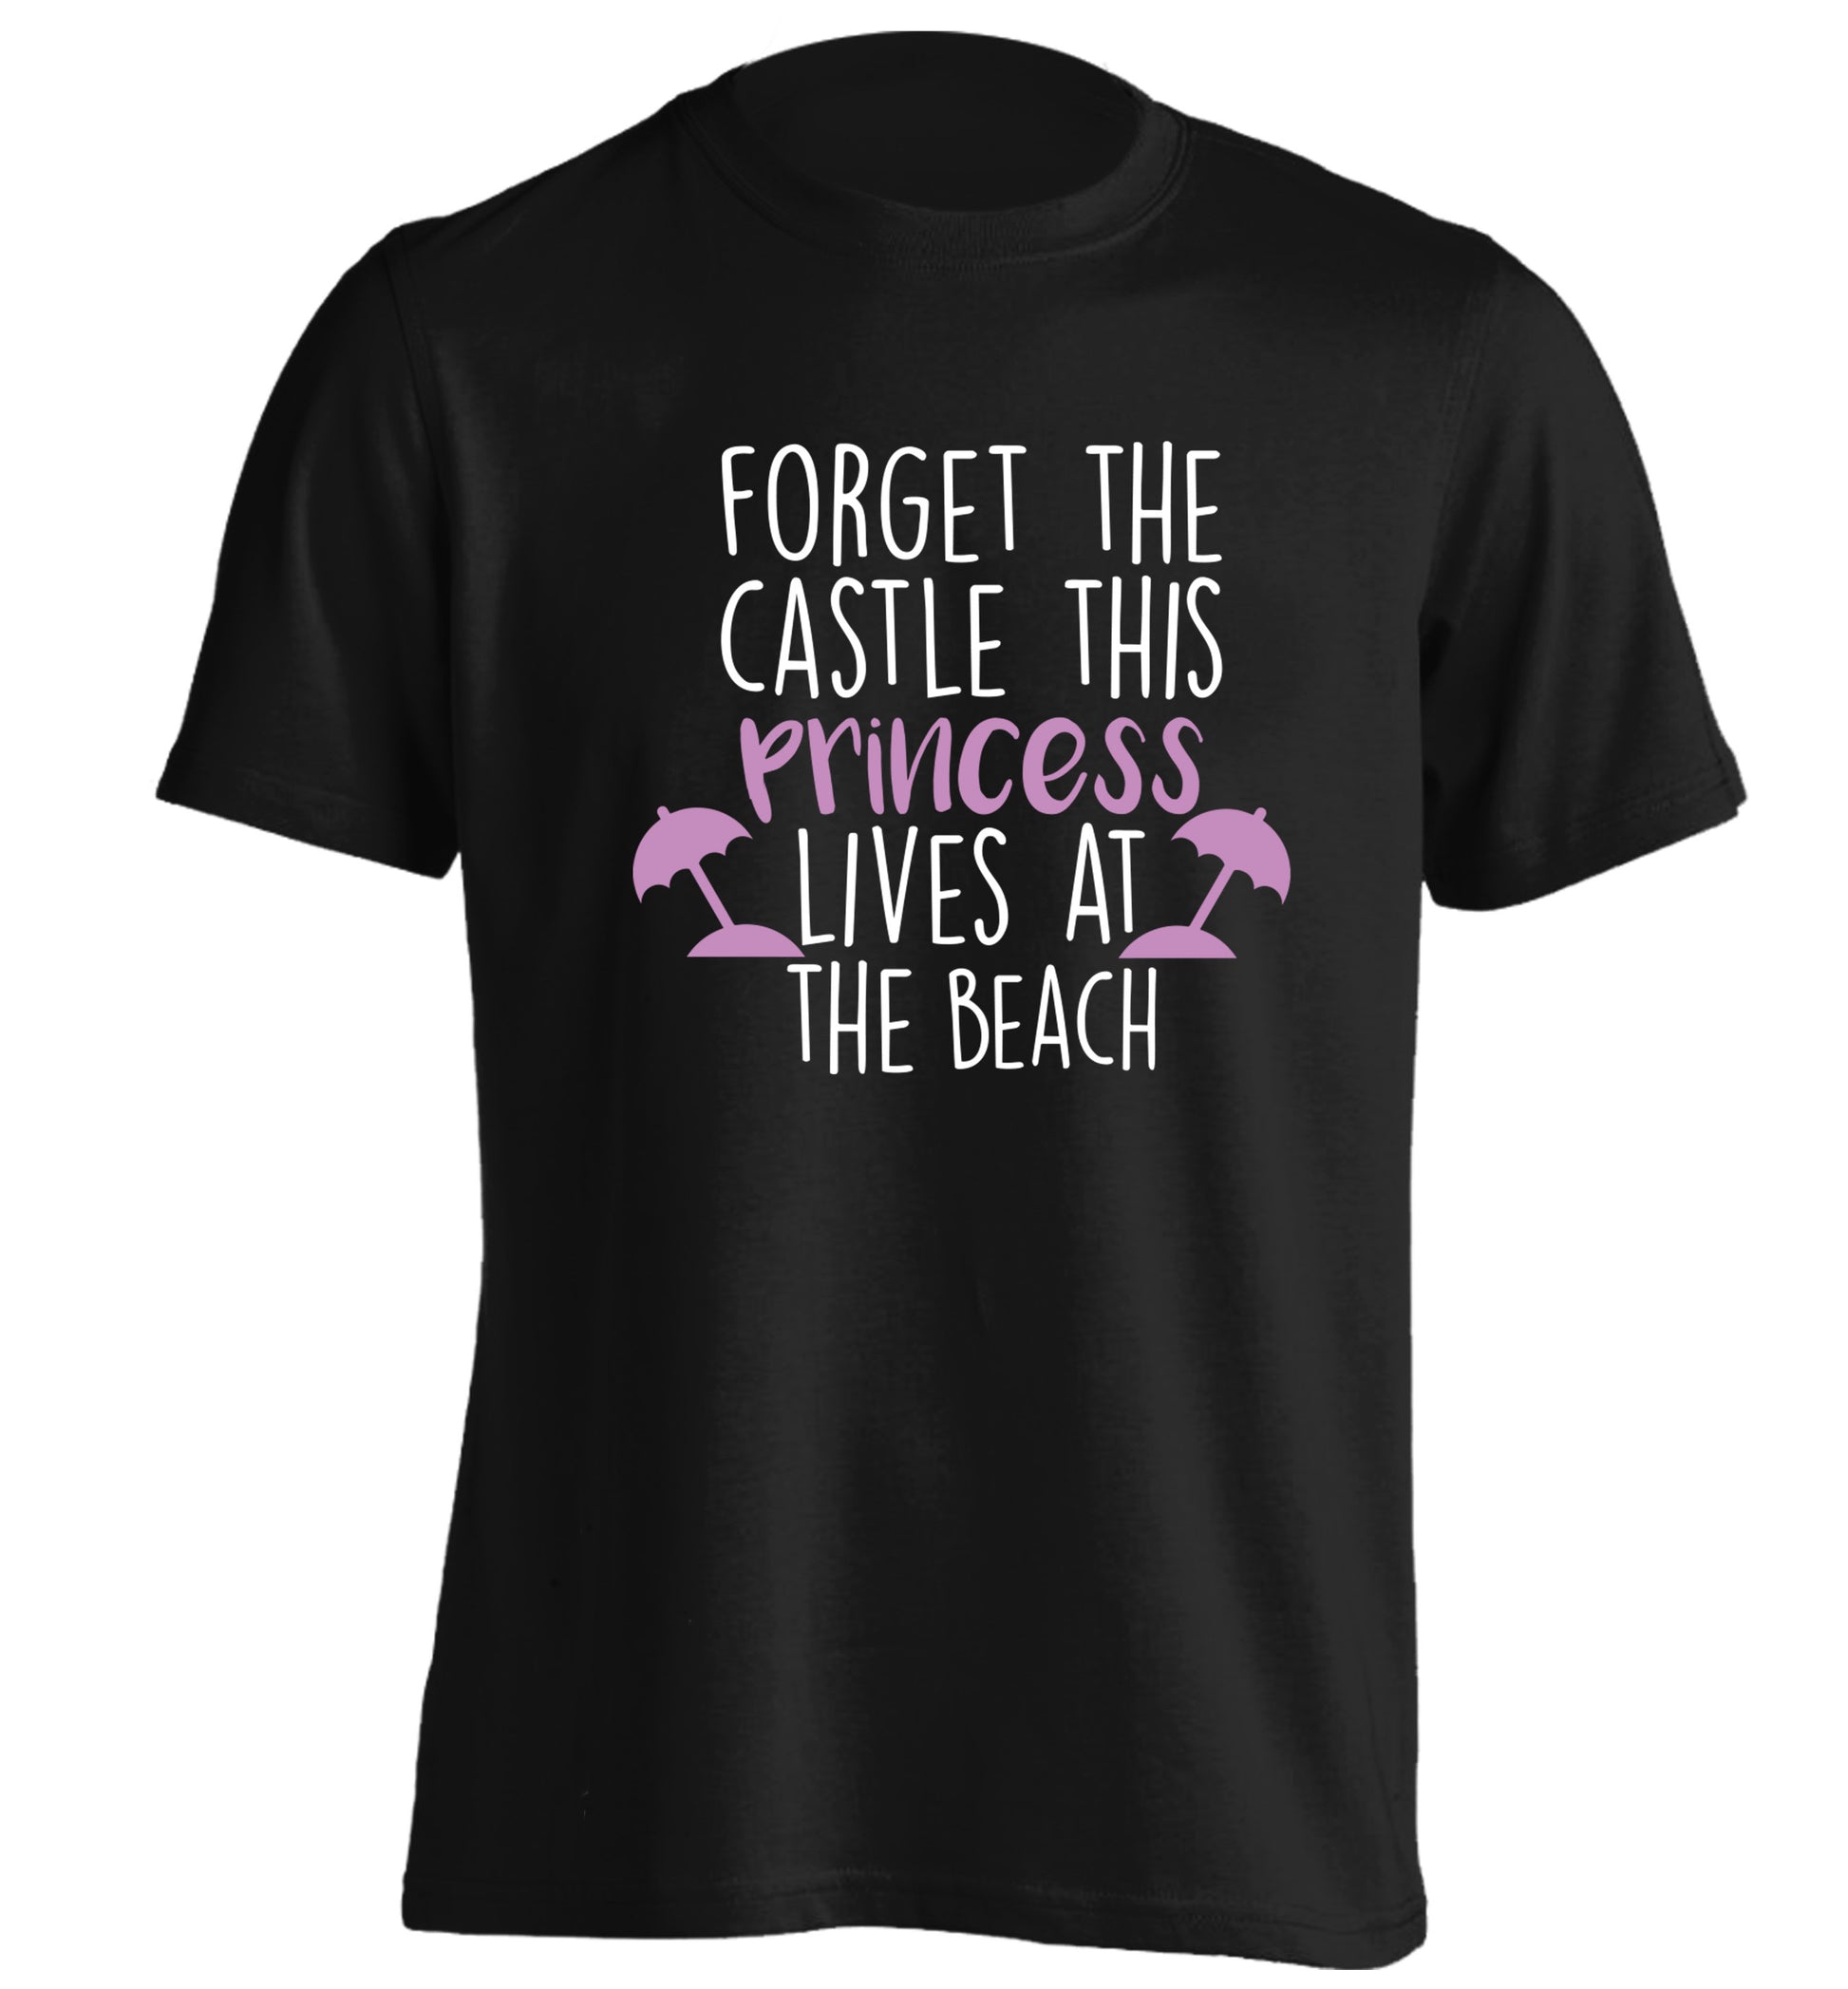 Forget the castle this princess lives at the beach adults unisex black Tshirt 2XL